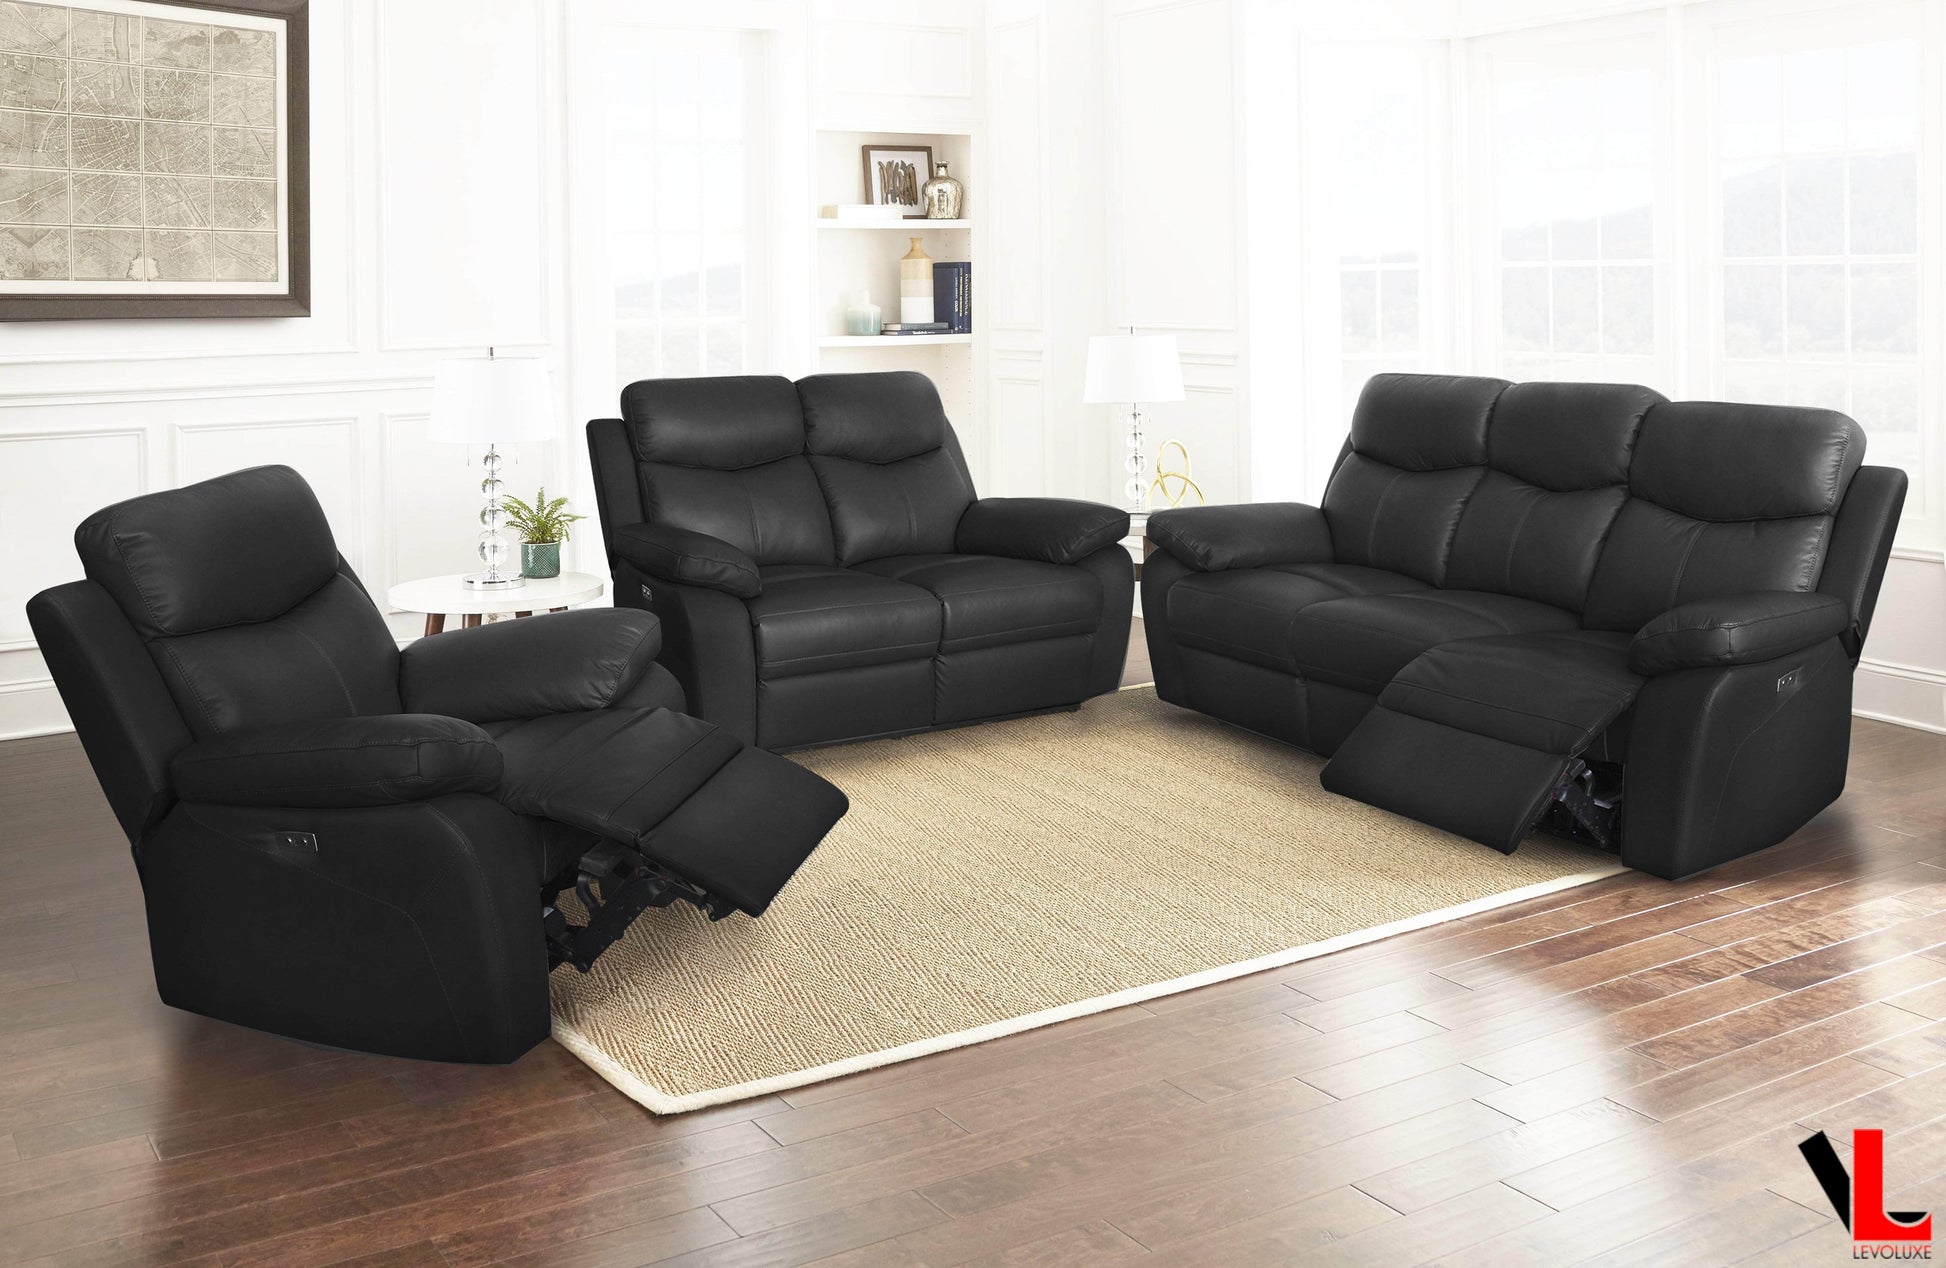 Pending - Levoluxe Black Aveon 3 Piece Pillow Top Arm Reclining Sofa, Loveseat and Chair Set in Leather Match - Available in 2 Colours